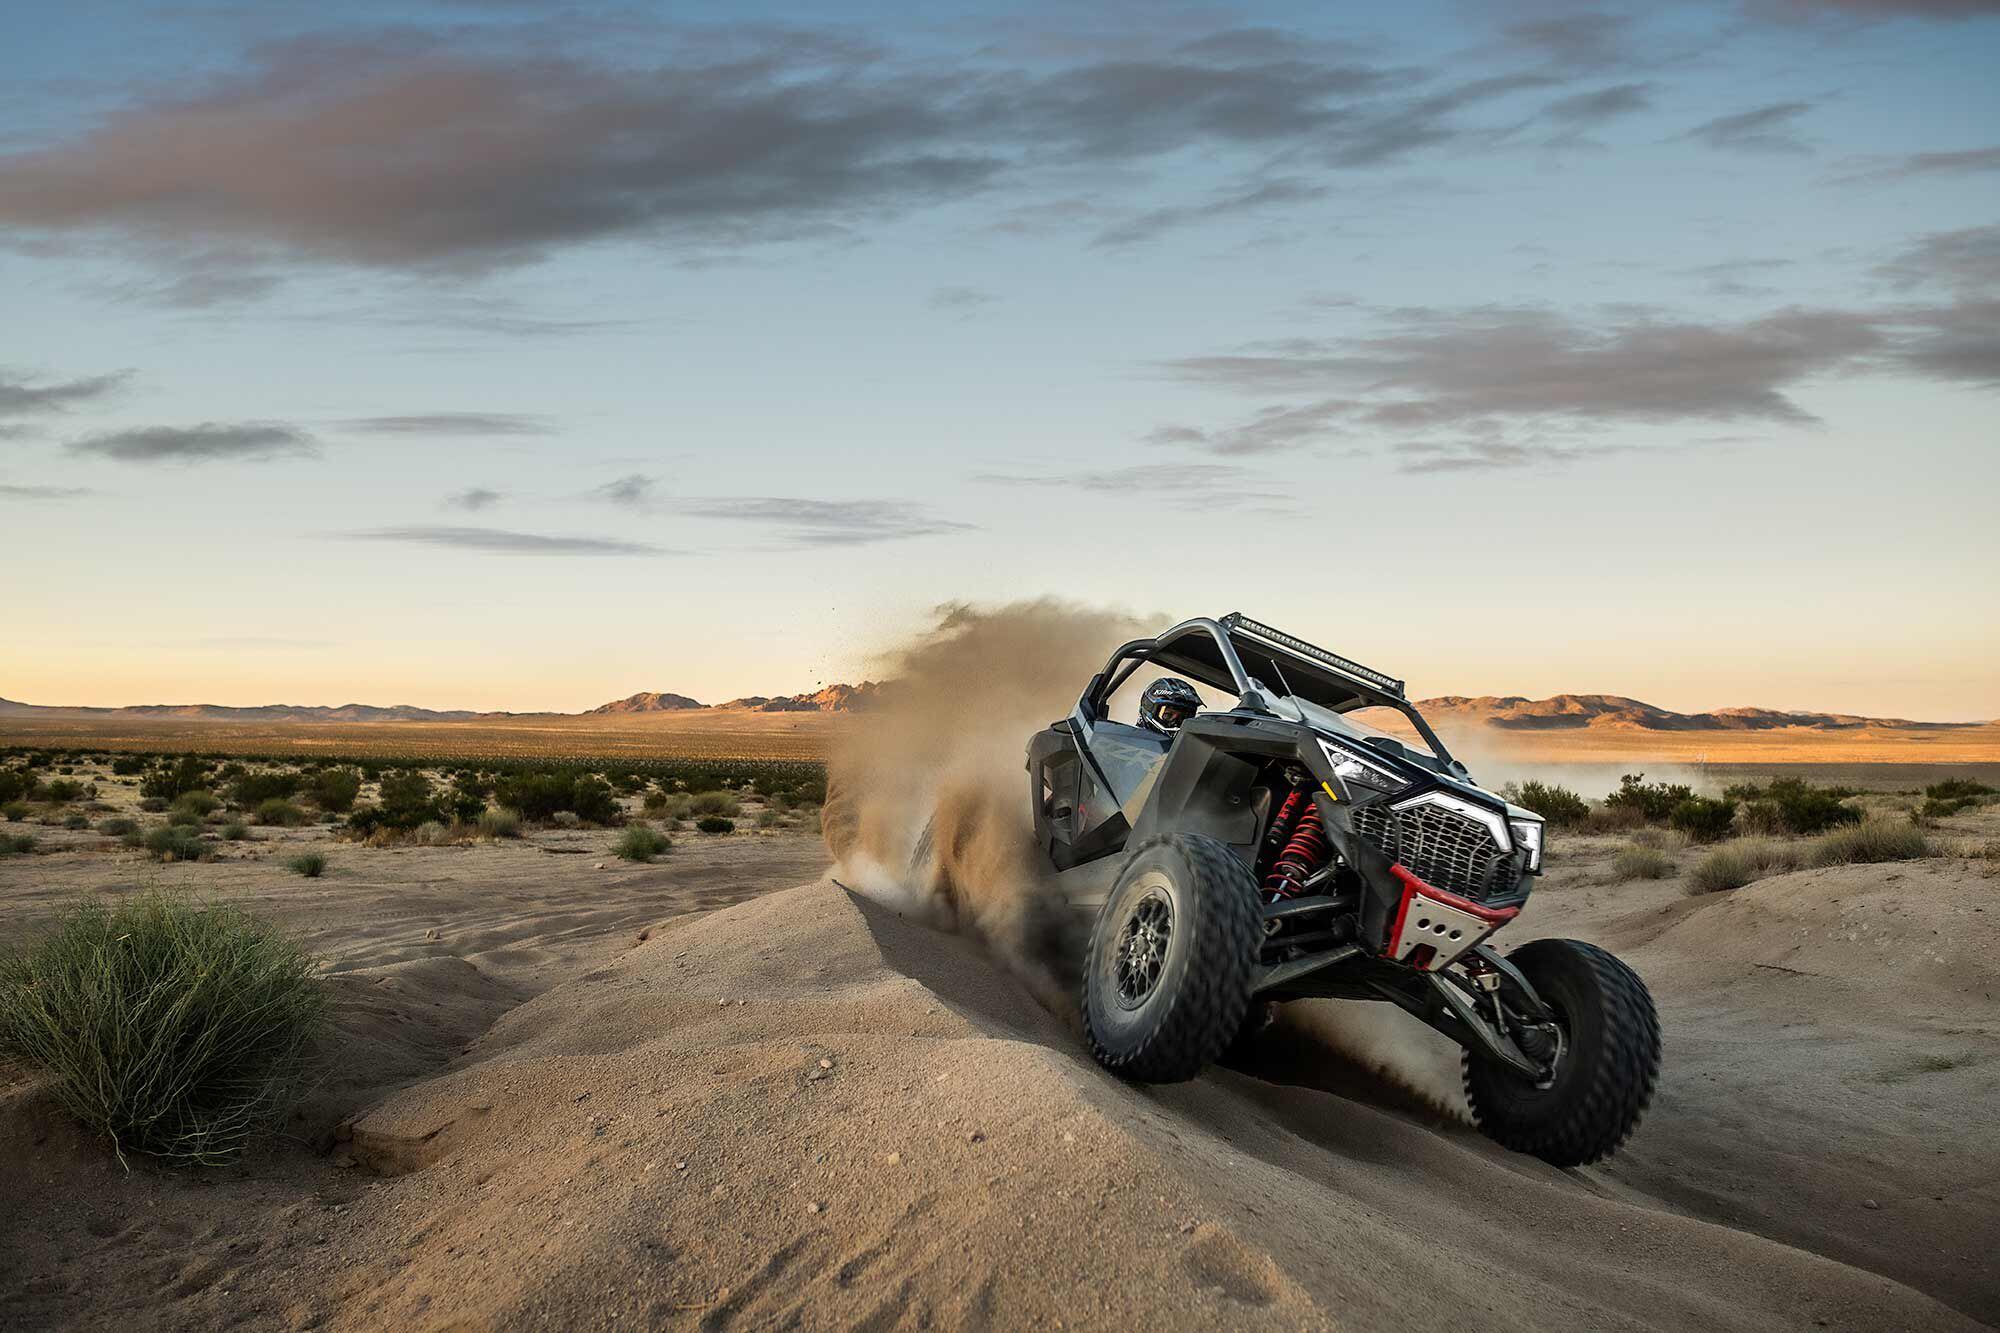 The sport UTV category is full of heated competition and high-dollar performance features. Here are the top dogs for 2022.